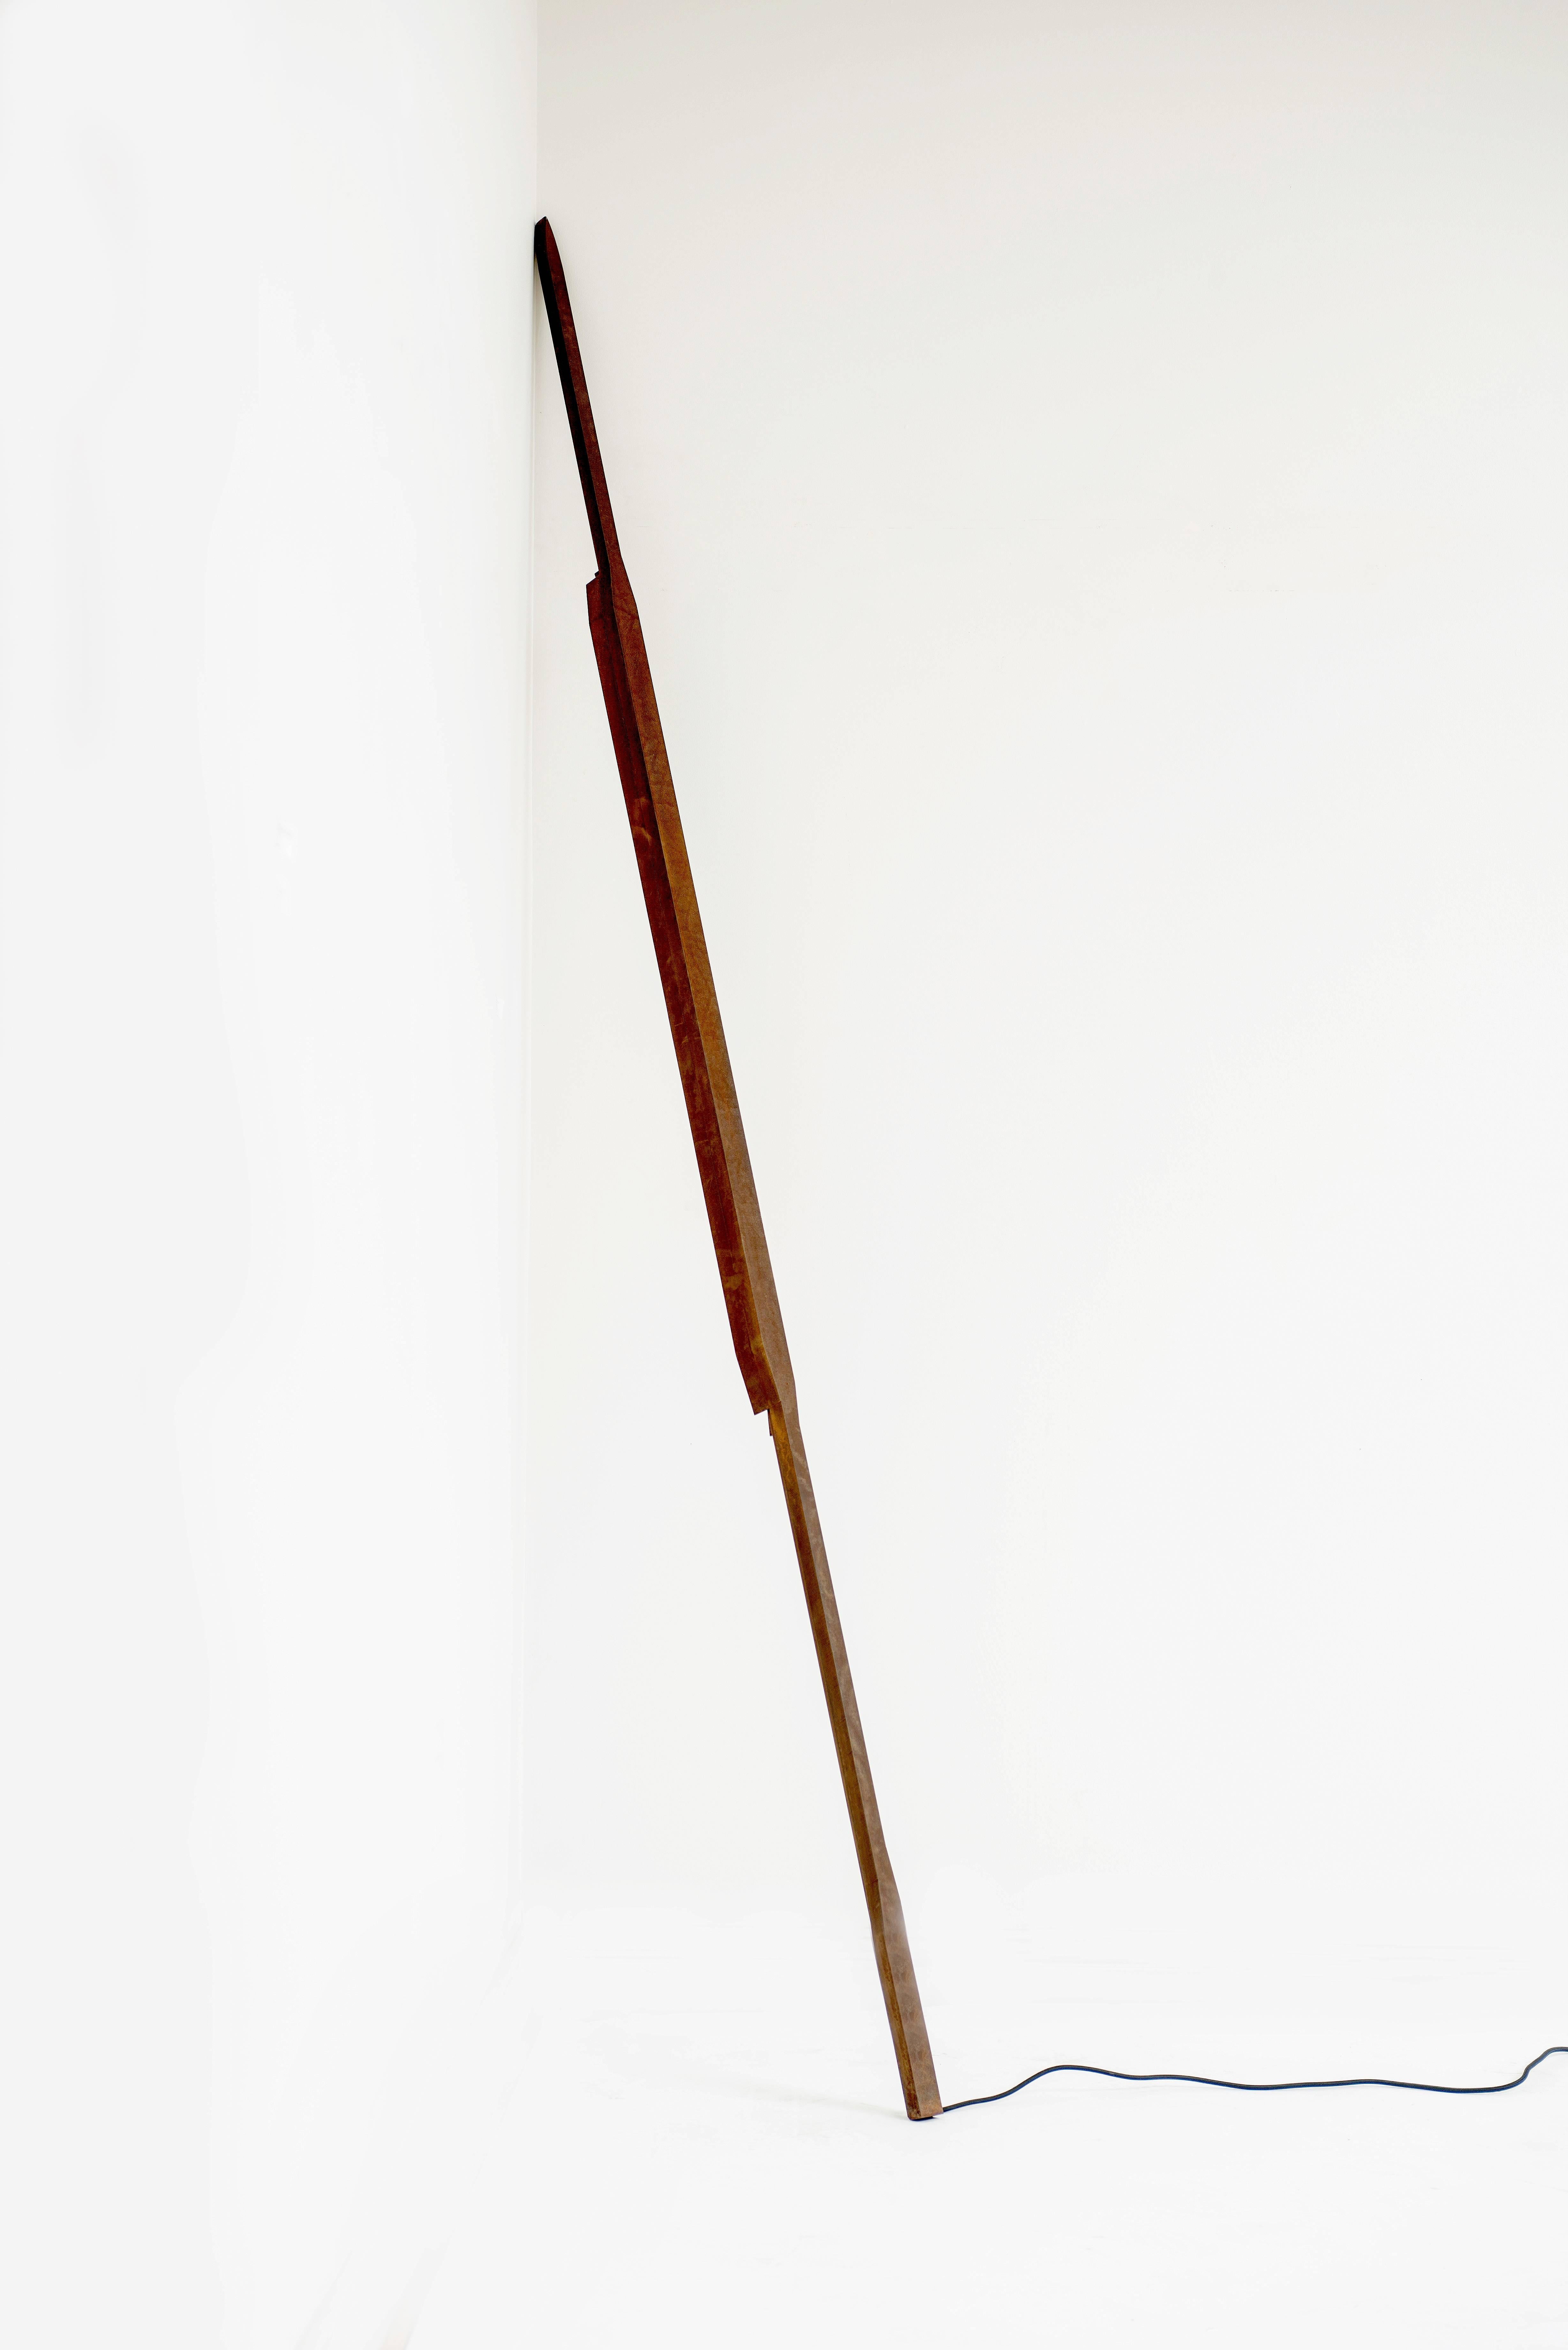 Eric Slayton
Harpoon Light, 2017
Patinated Cor-Ten steel, LED light
2 x 2.5 x 106 in

A floor standing, patinated, core-ten steel led Harpoon light by Brooklyn designer Eric Slayton. The piece is designed to lean against a corner or wall, to best